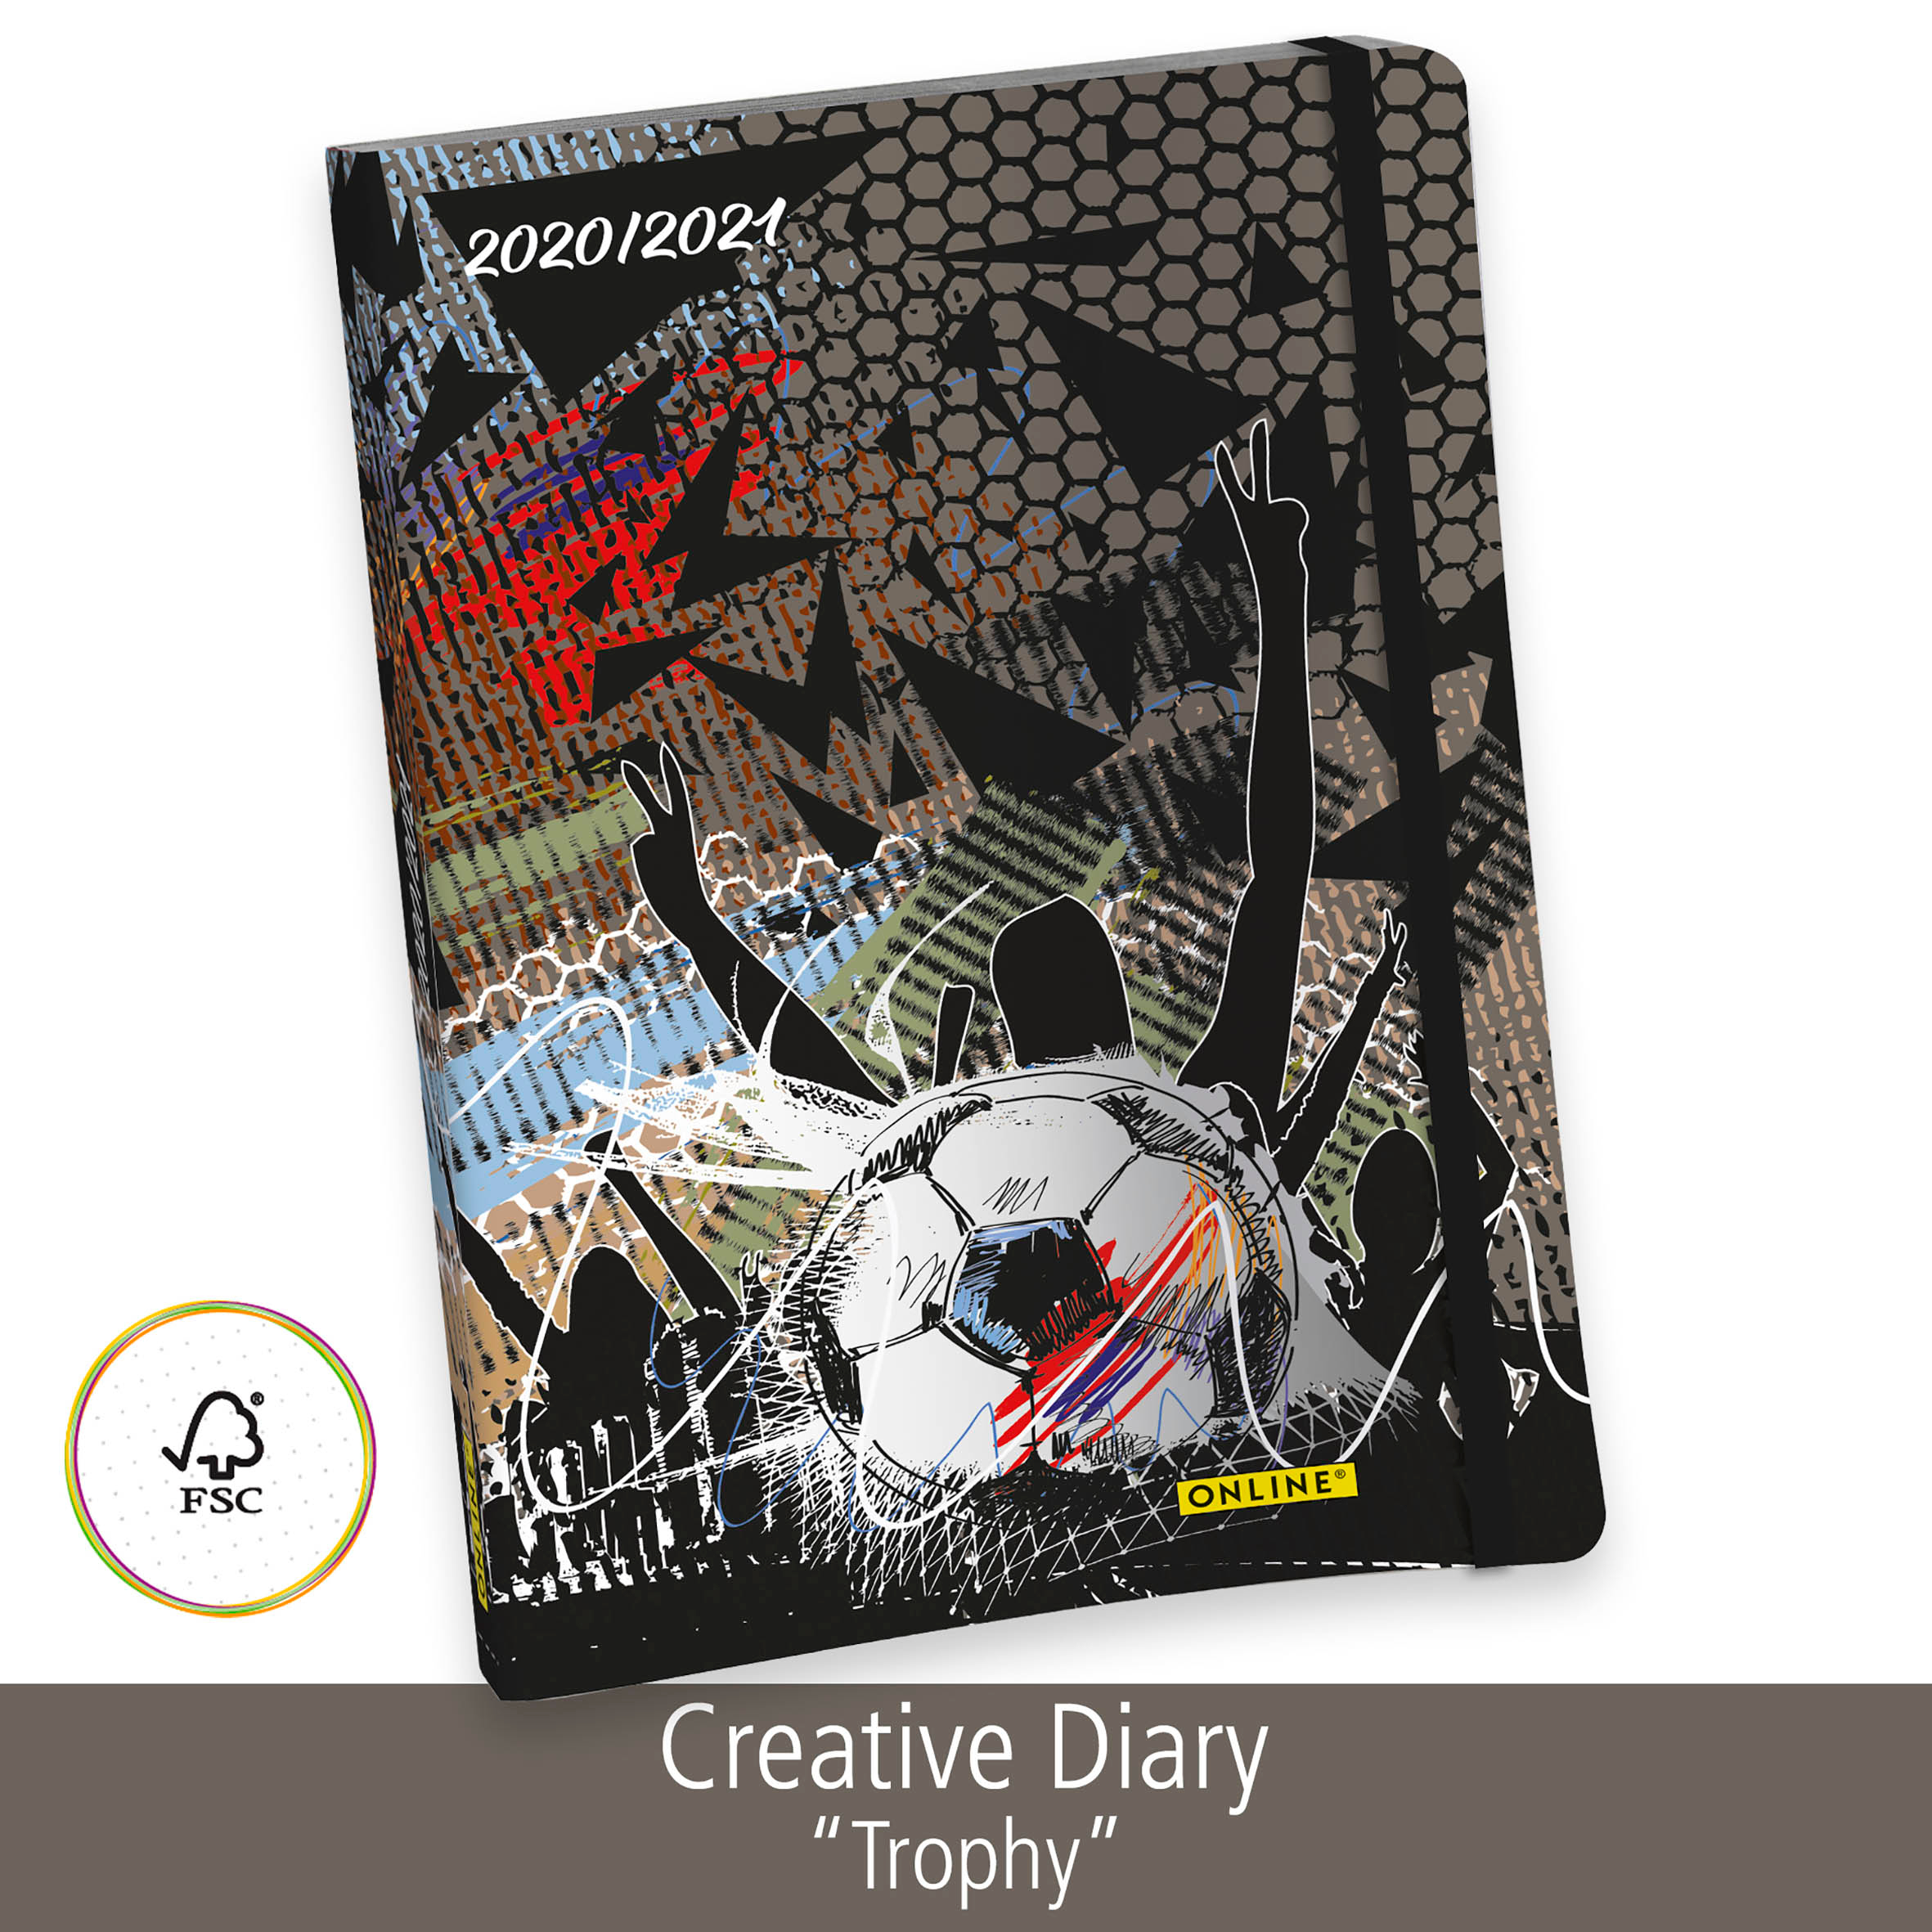 ONLINE Creative Diary Trophy 02991 18 months, A5 18 months, A5